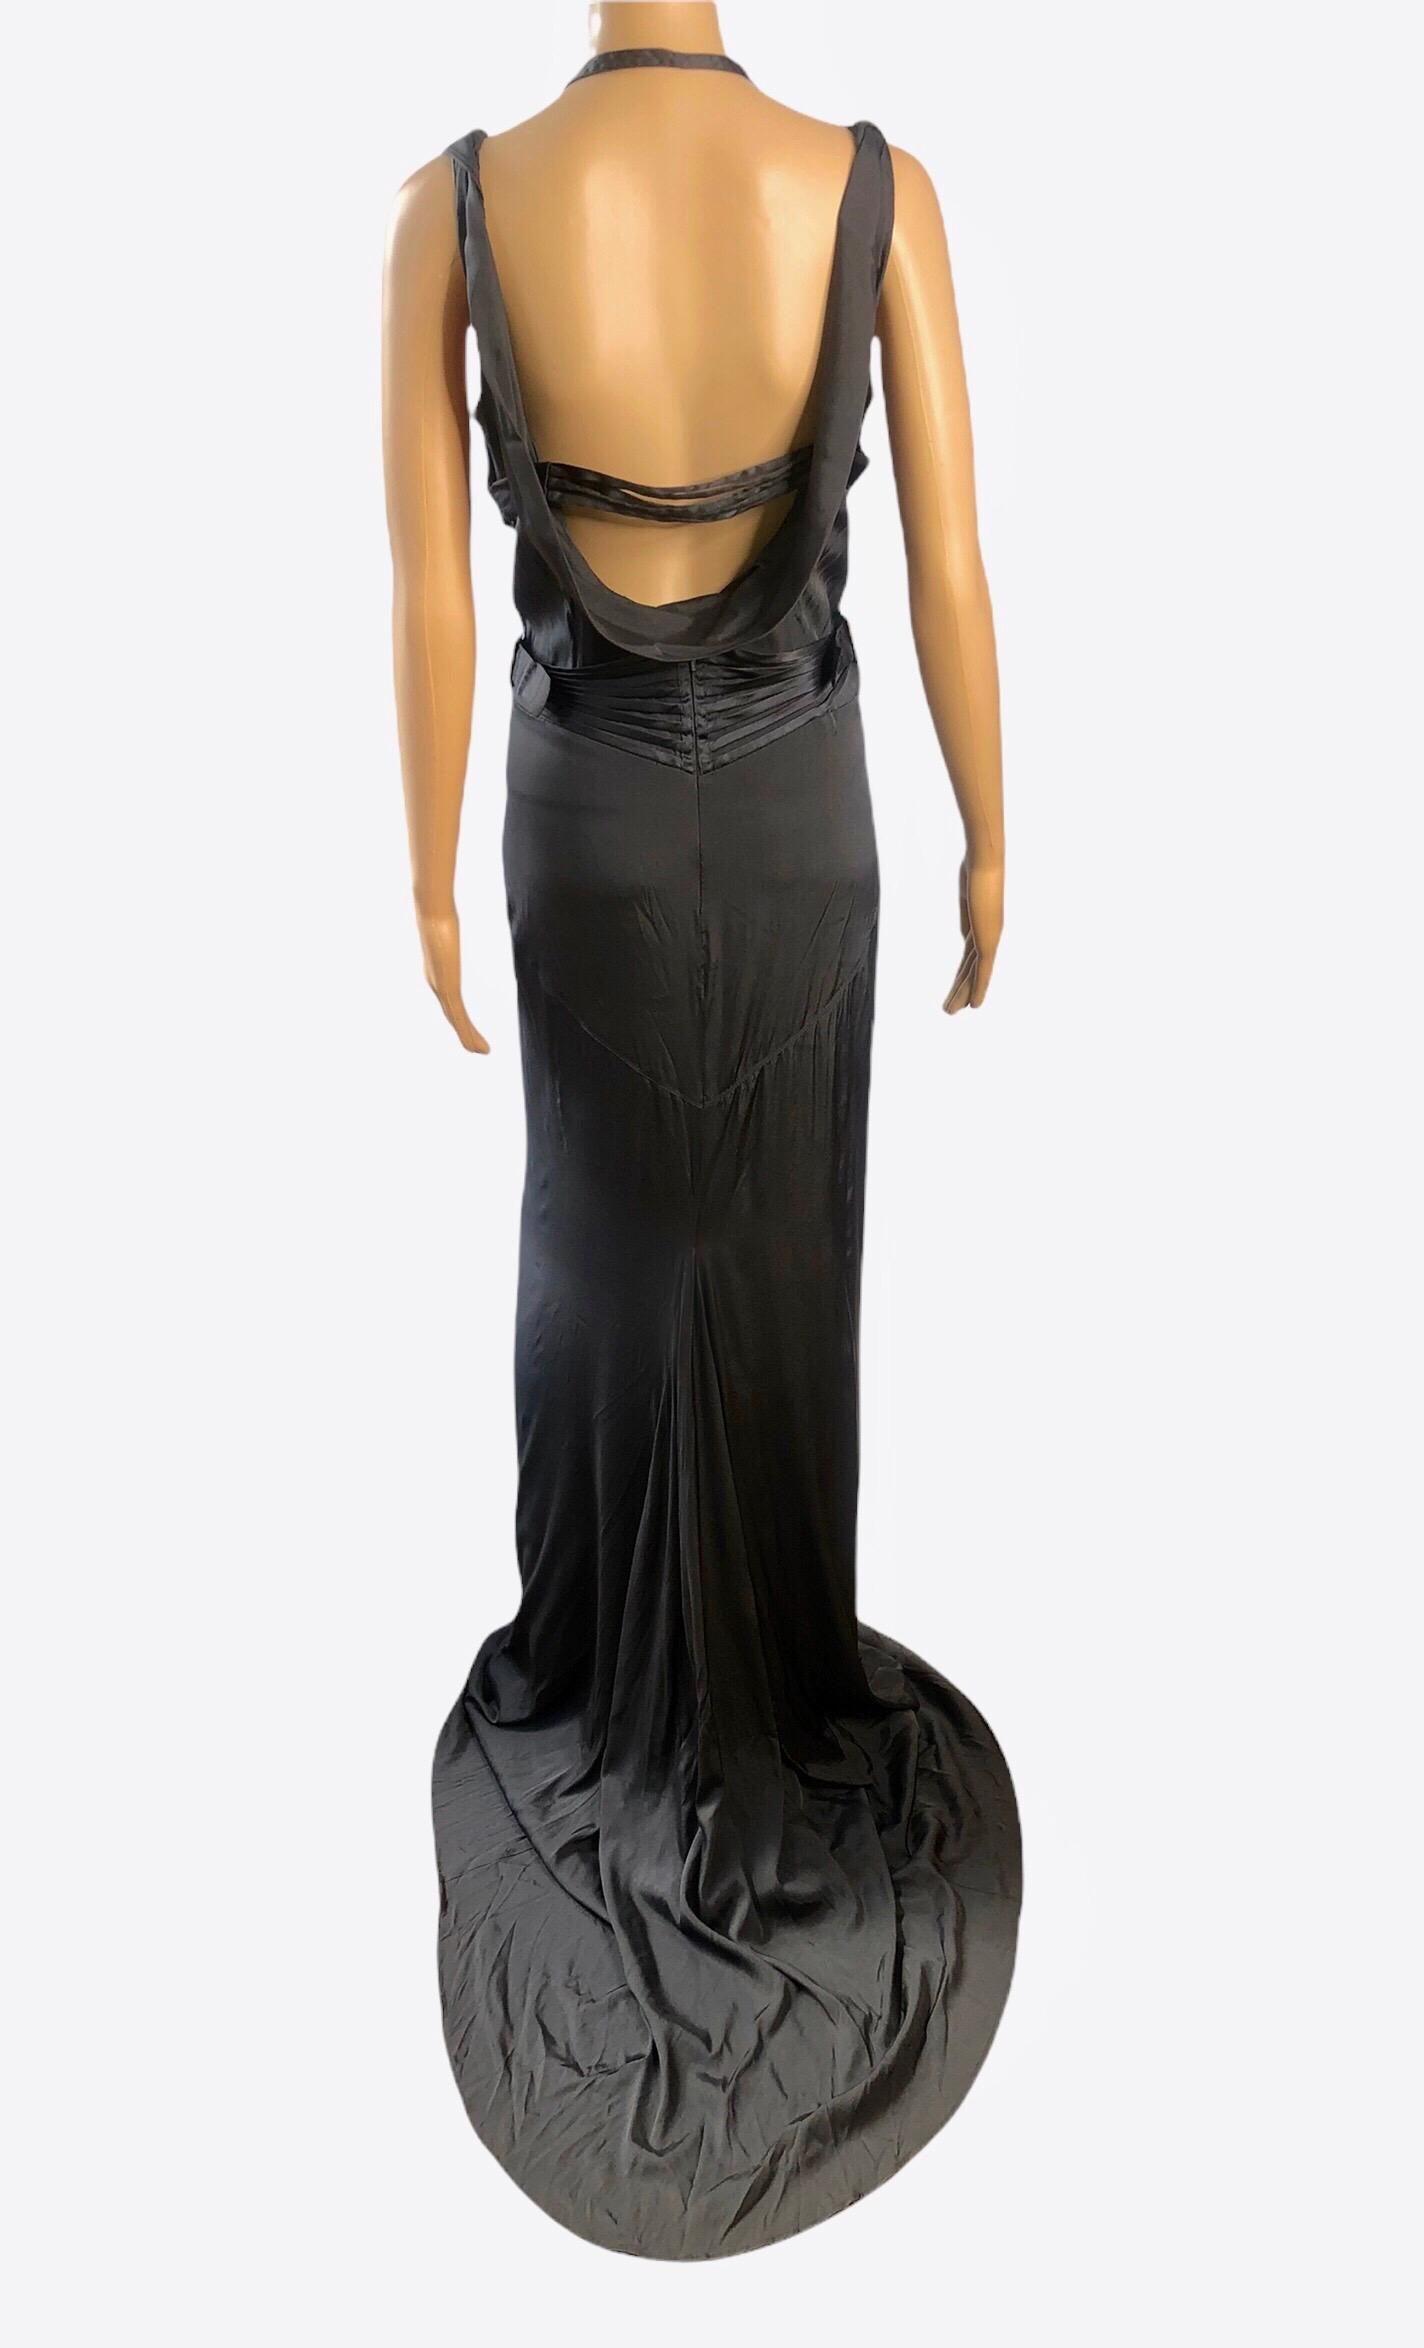 Tom Ford for Gucci F/W 2003 Bustier Corset Silk Evening Dress Gown 3